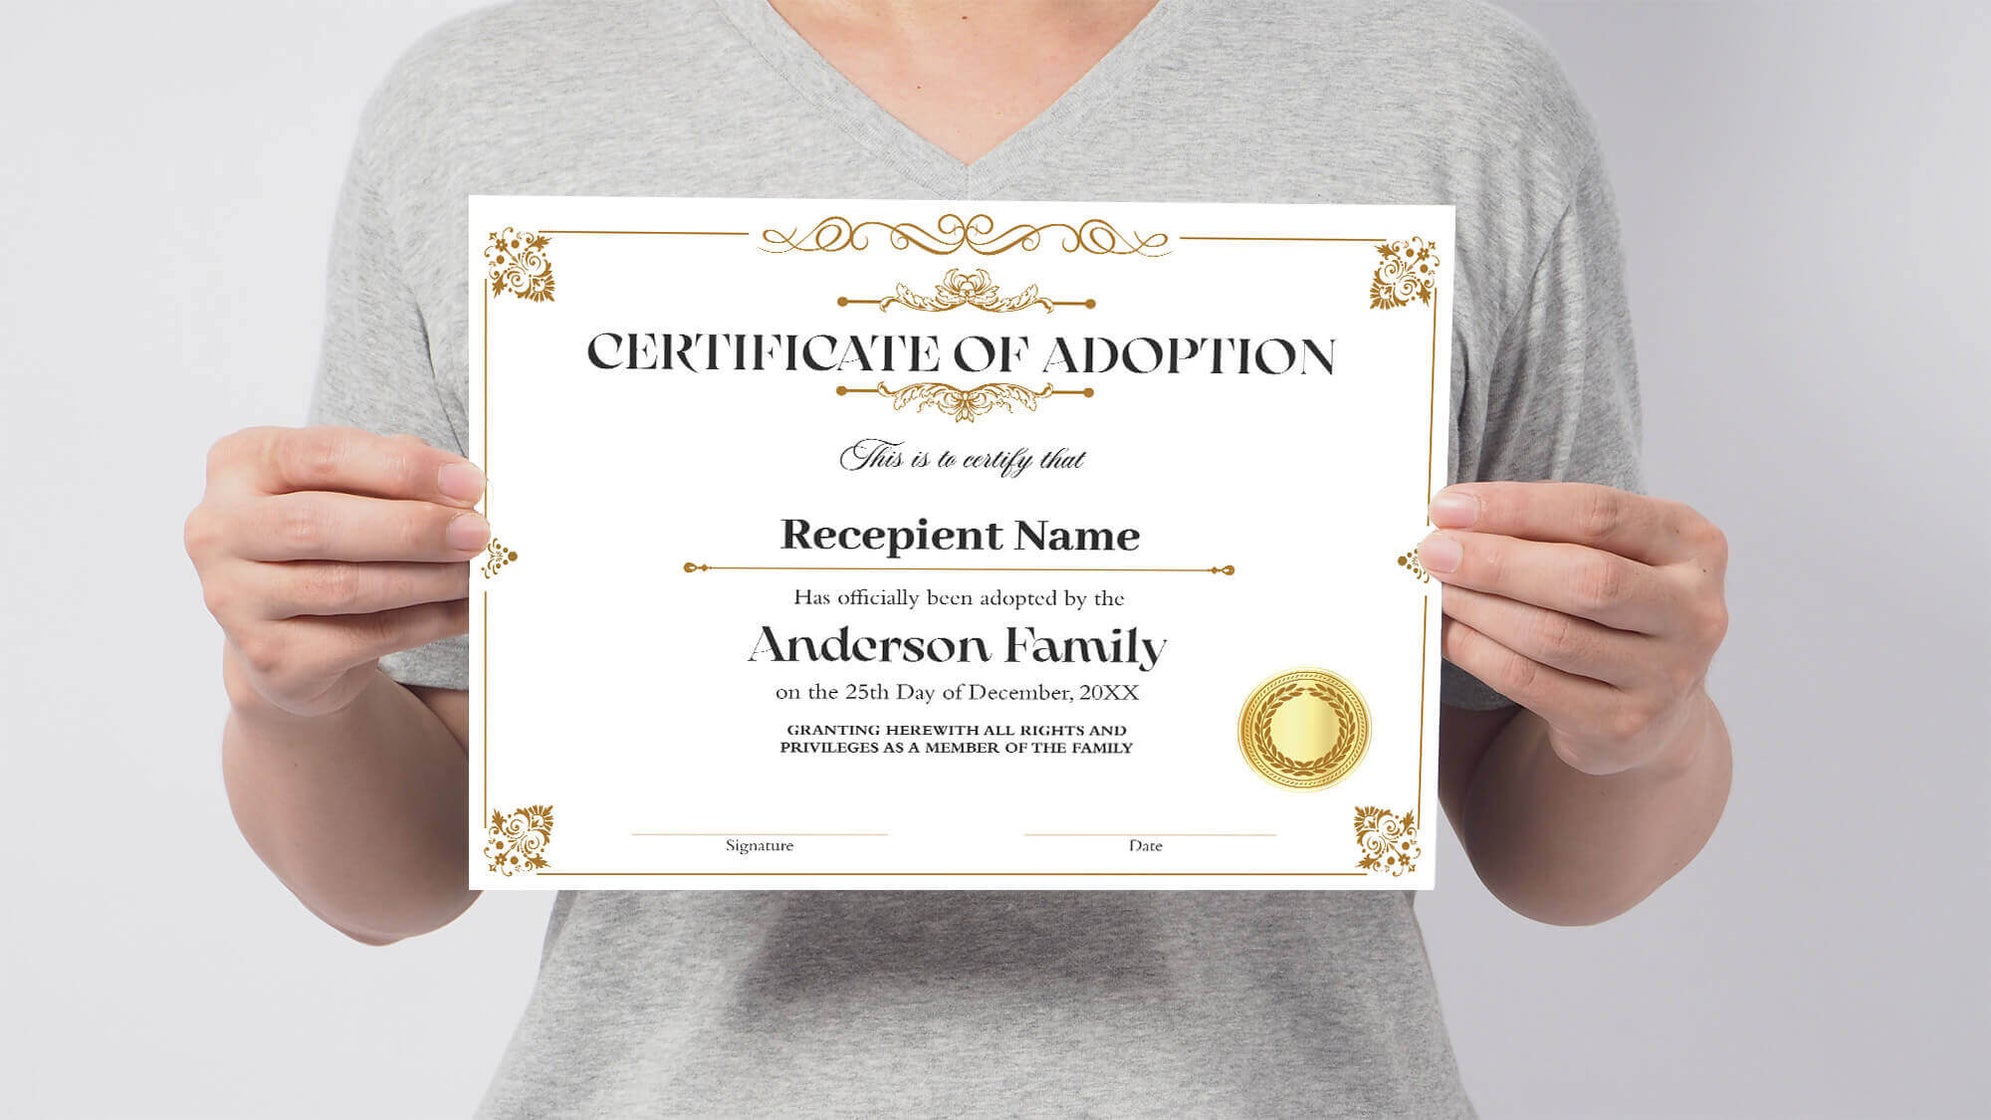 DIY Certificate of Adoption to Our Family Template - Posh Park